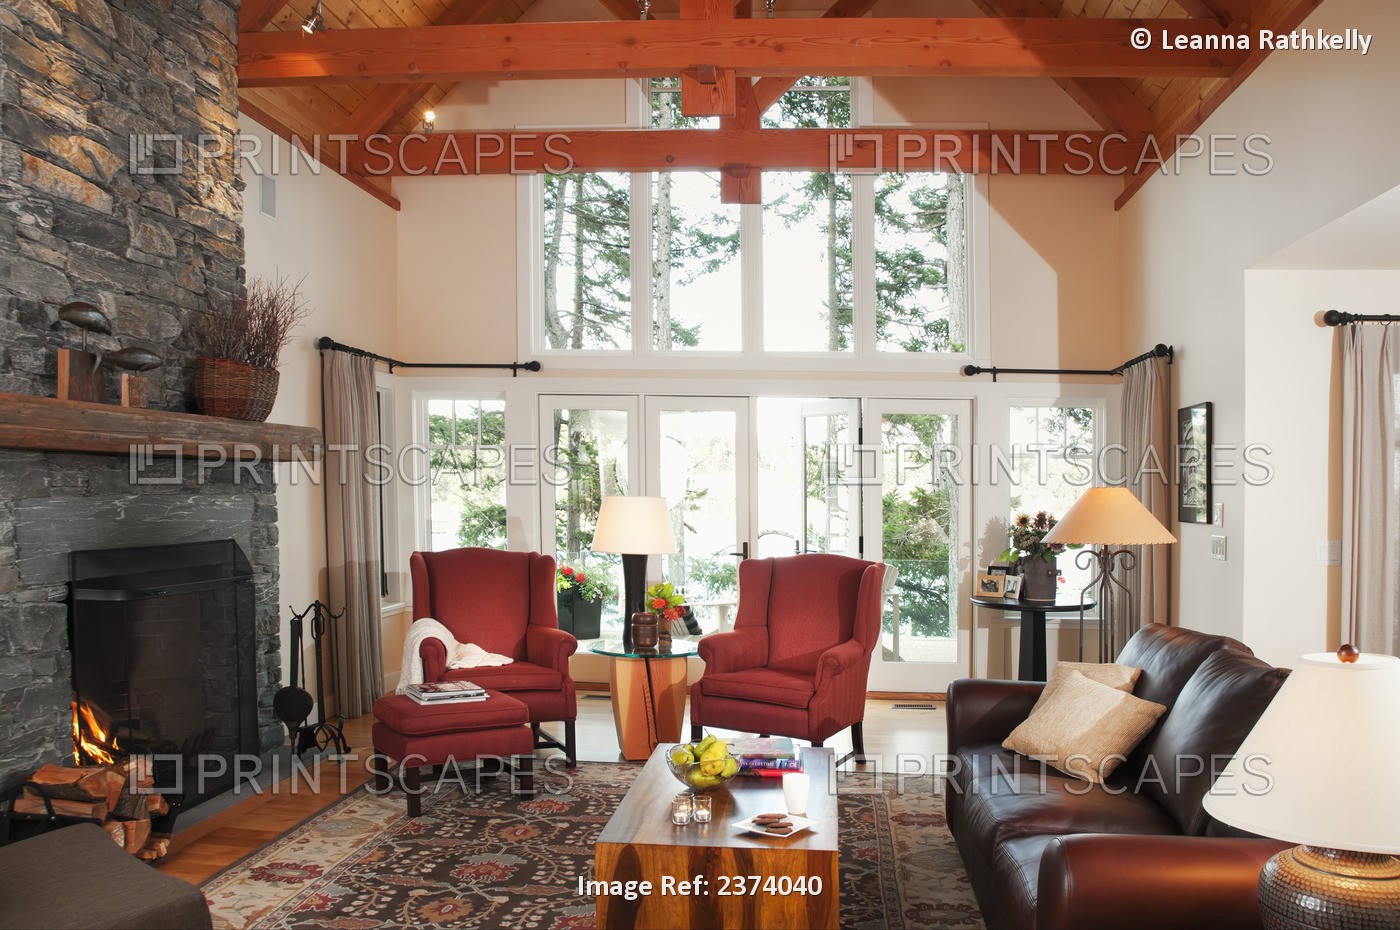 Living Room With Fireplace Of Home With An Ocean View; Mayne Island, British ...